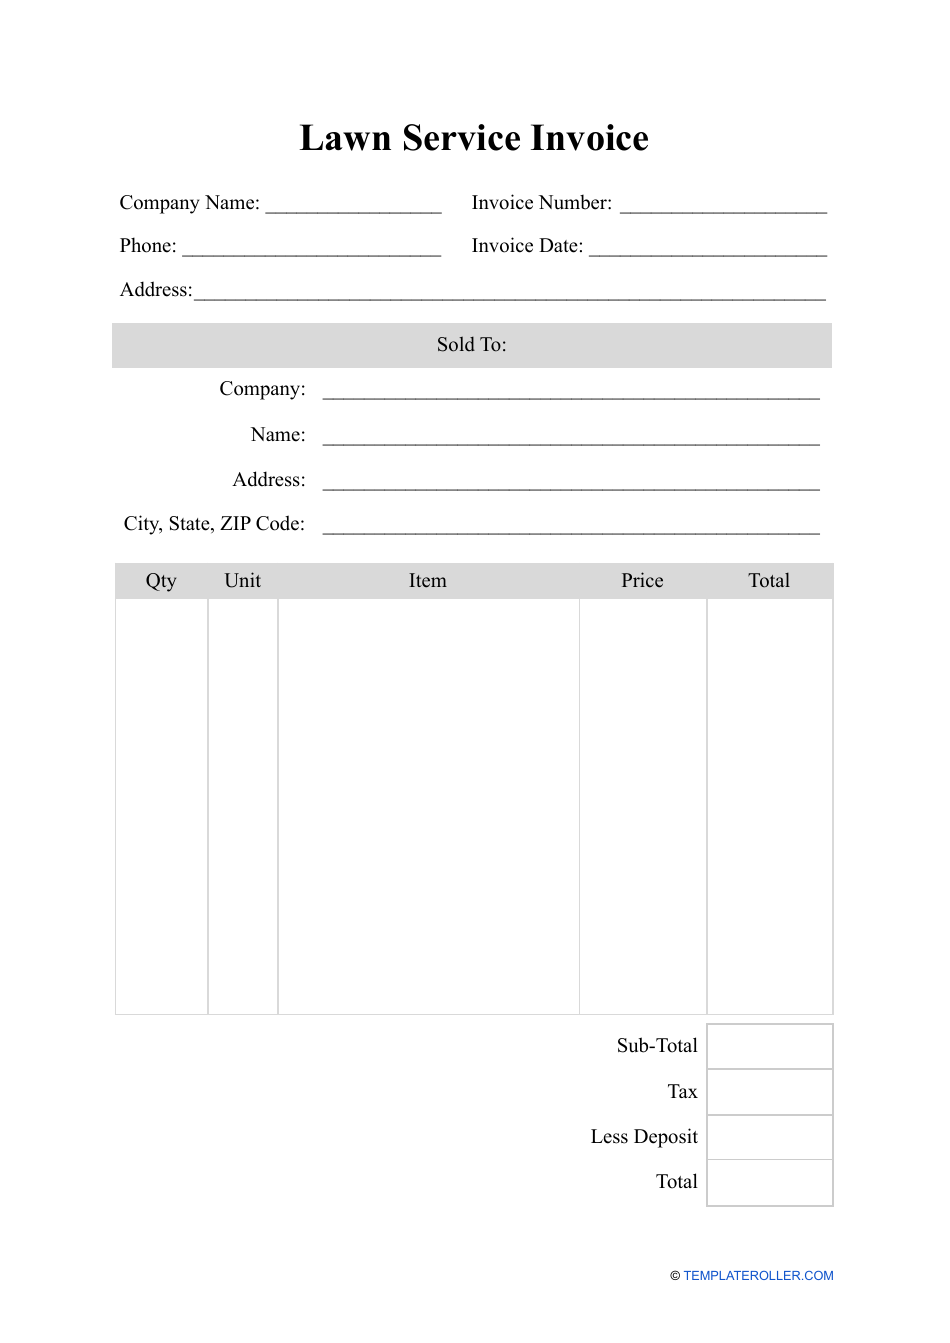 lawn-service-invoice-template-fill-out-sign-online-and-download-pdf-templateroller